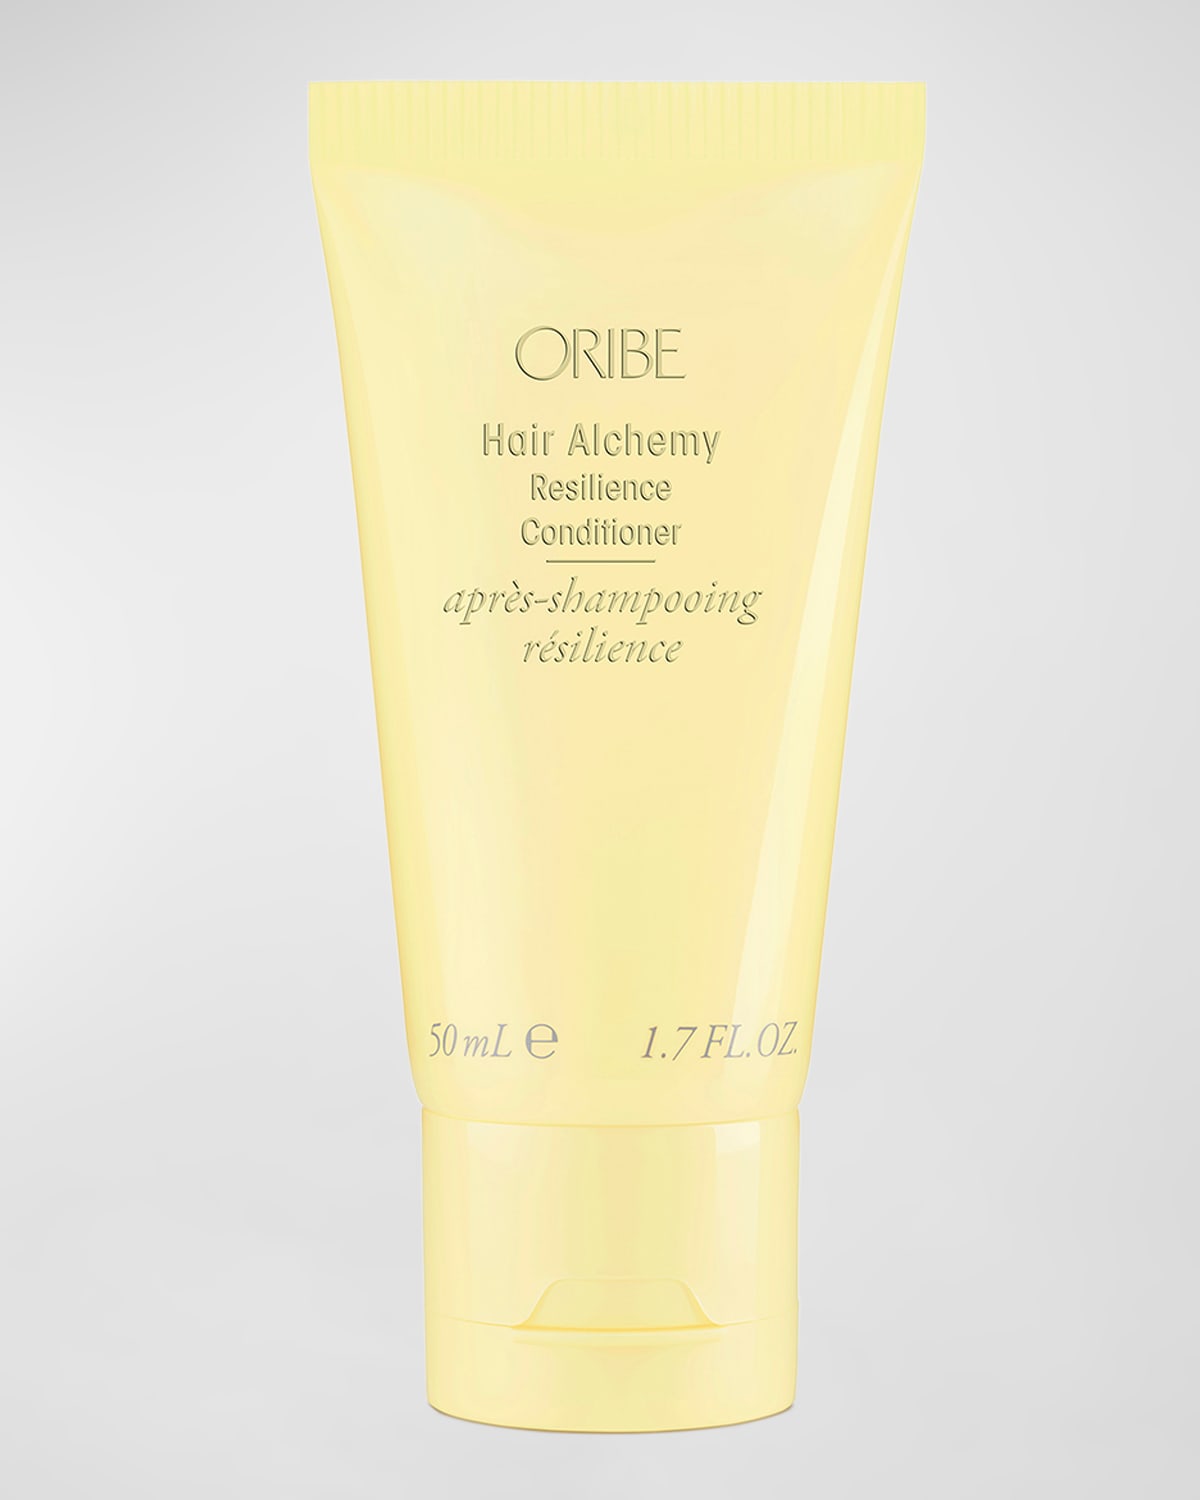 Shop Oribe Hair Alchemy Resilience Conditioner, 1.7 Oz. - Travel Size